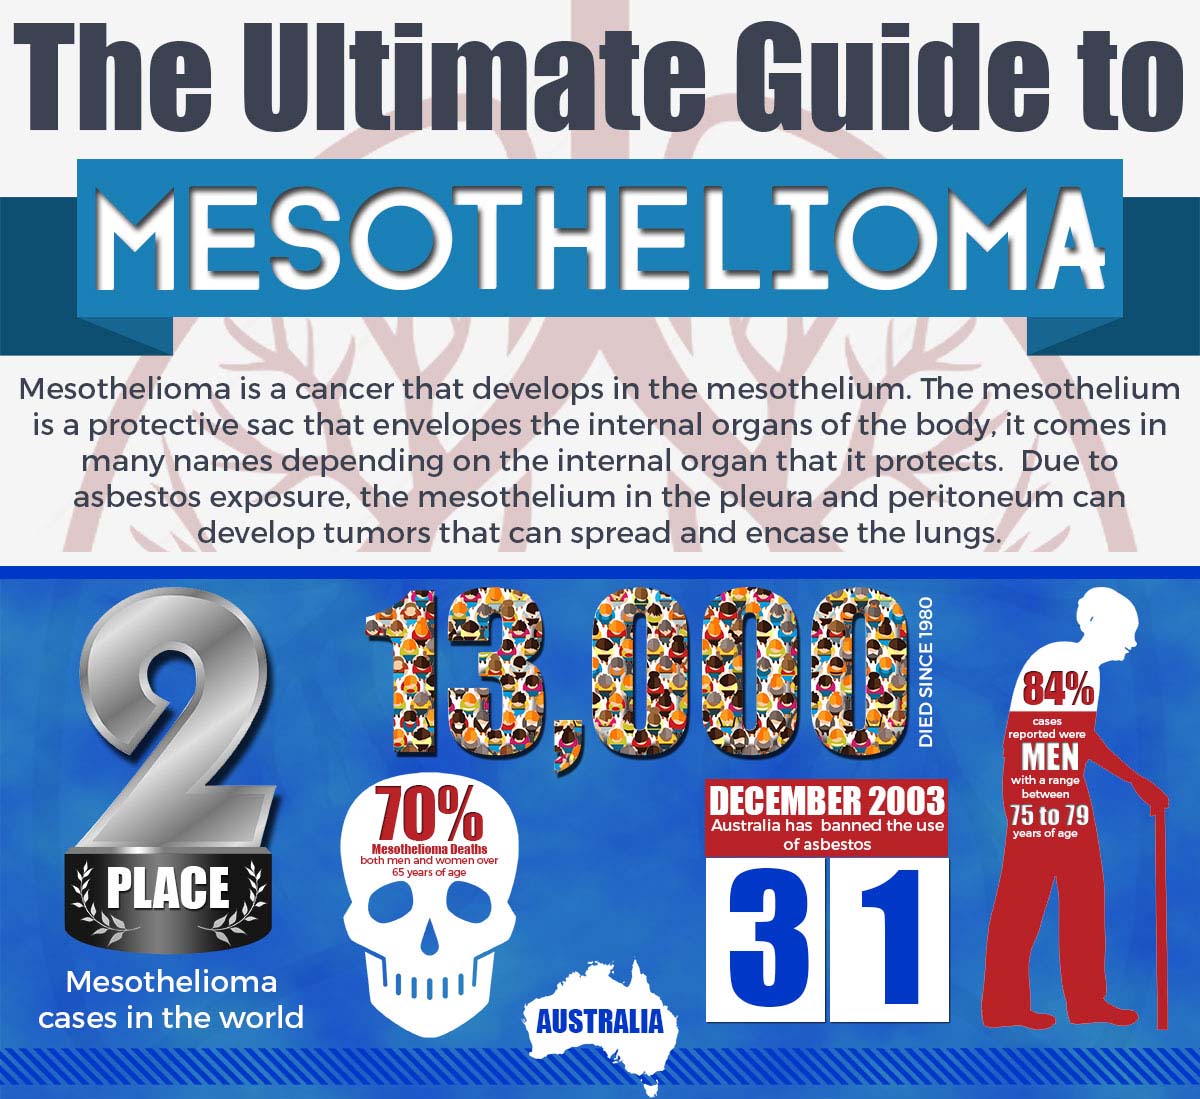 The Ultimate Guide To Mesothelioma Infographic